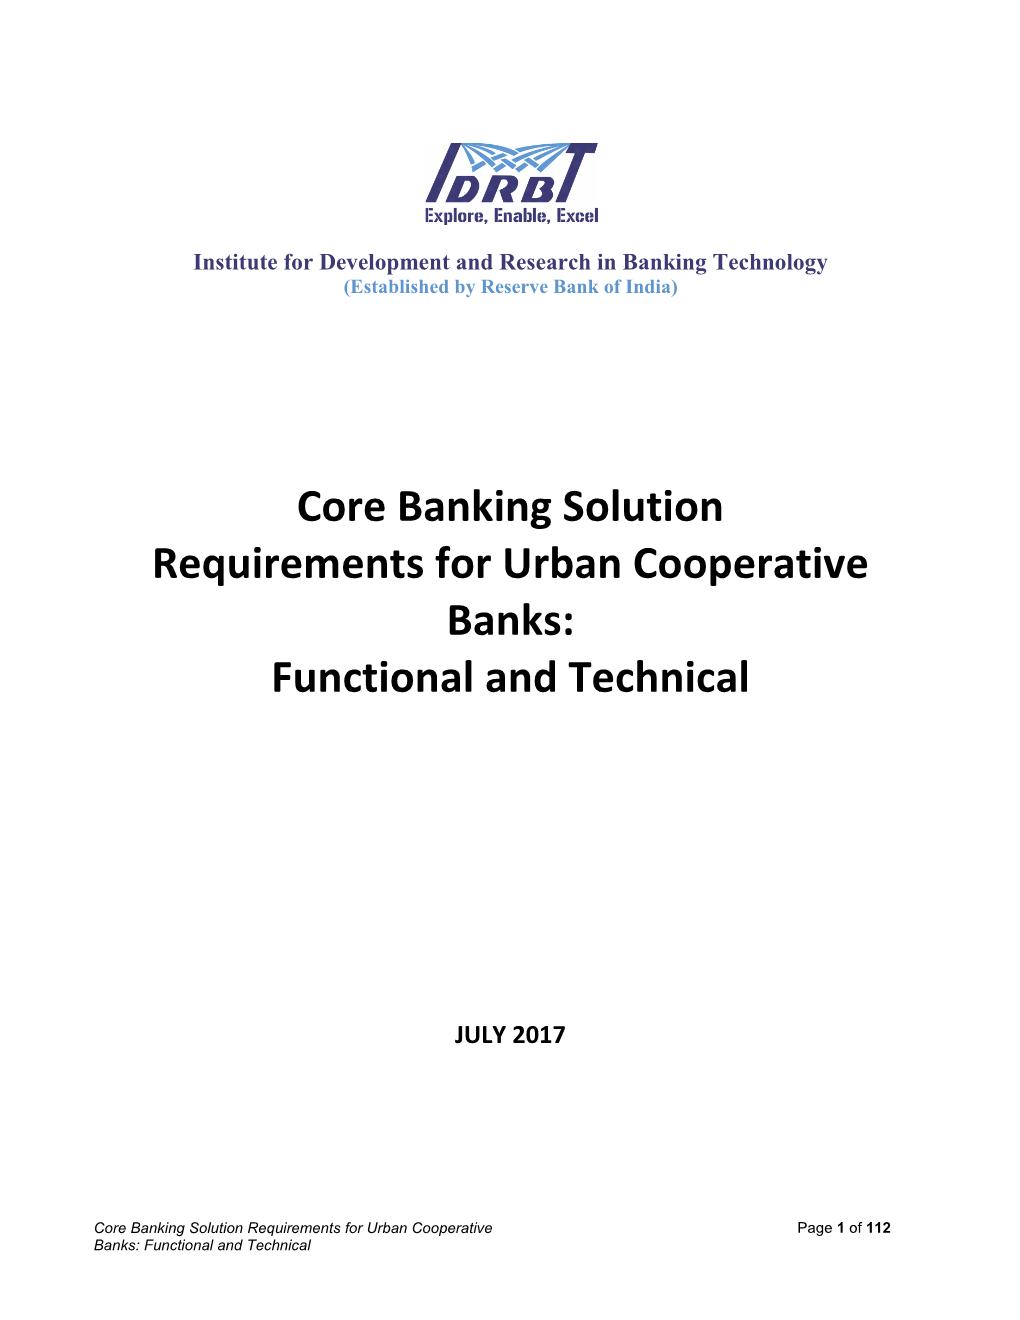 Core Banking Solution Requirements for Urban Cooperative Banks: Functional and Technical